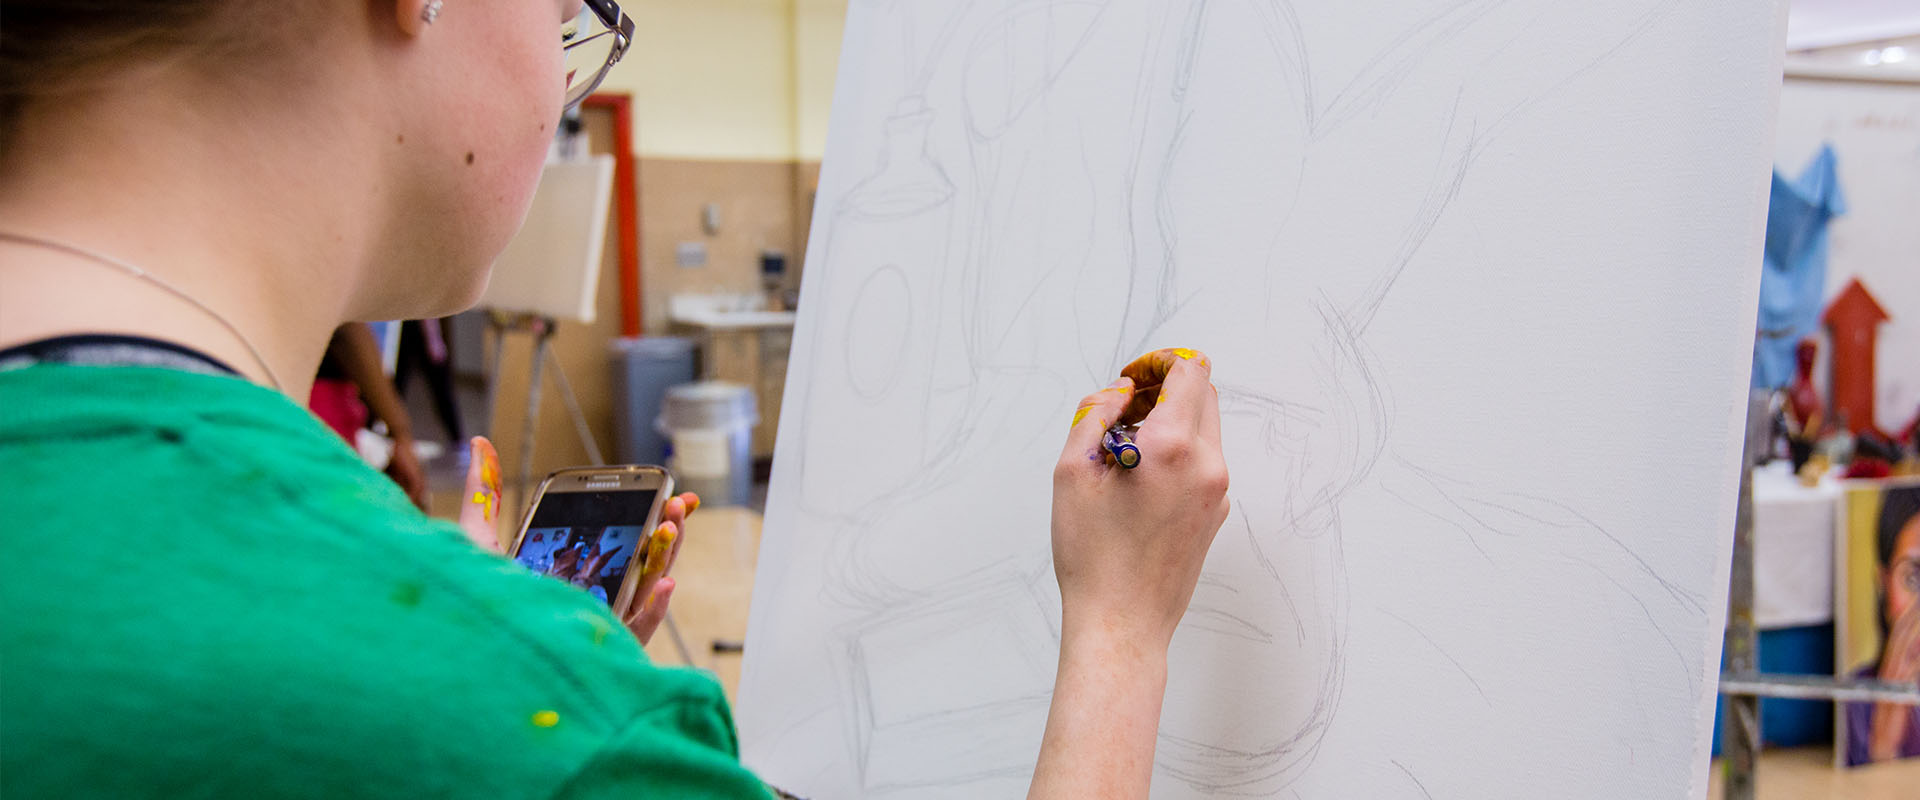 Major in Drawing at Northwest Missouri State University